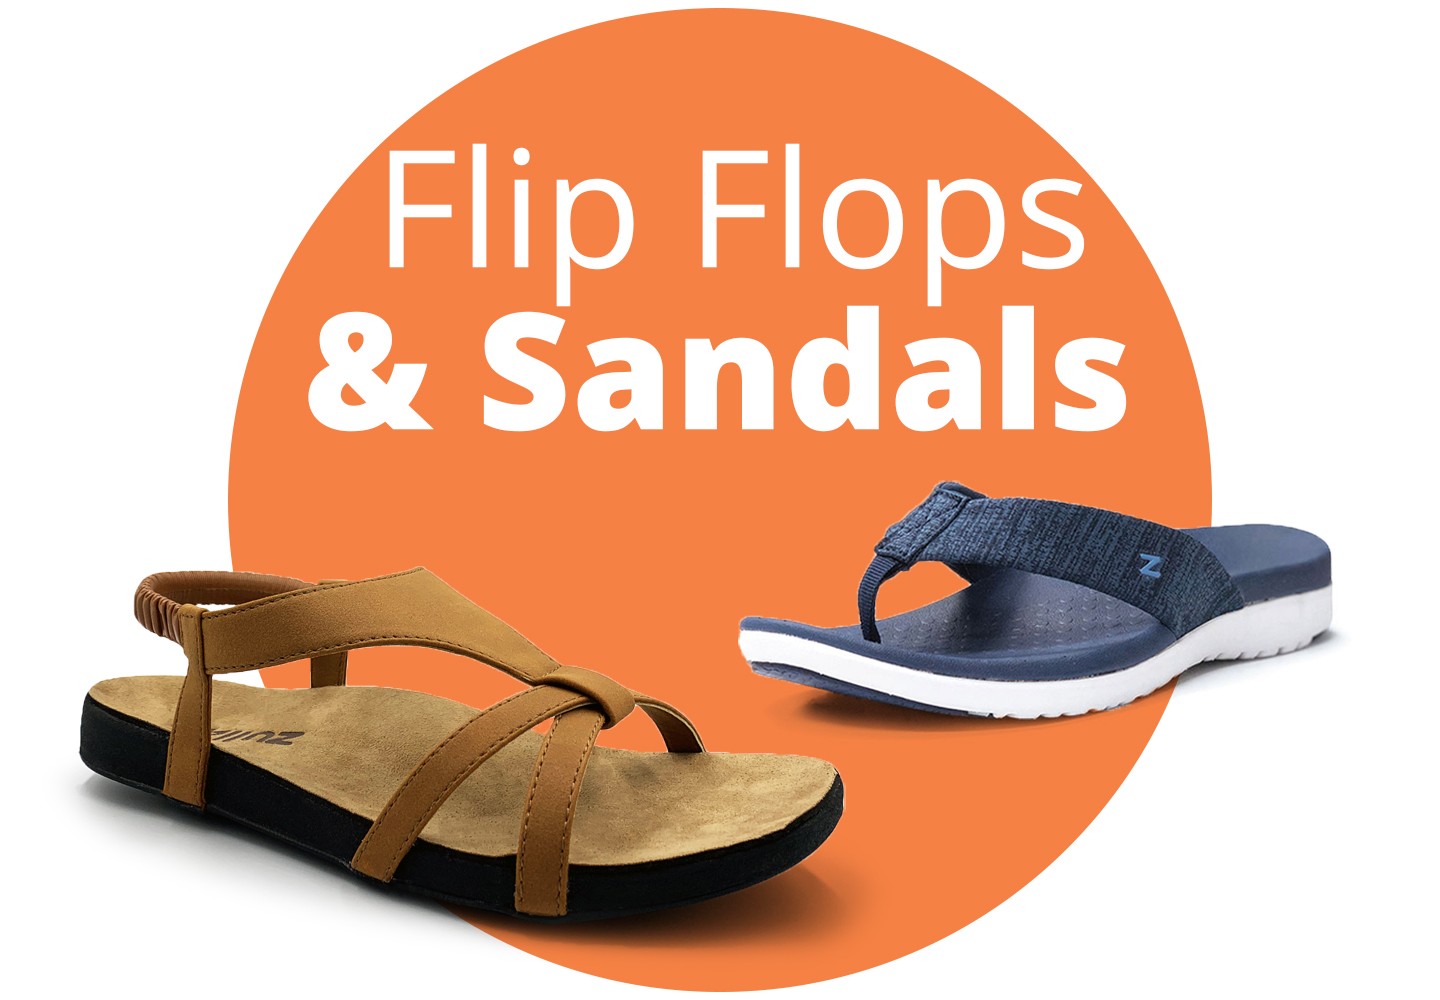 Are Your House Slippers Ruining Your Feet? Here's What Podiatrists Say. |  HuffPost Life